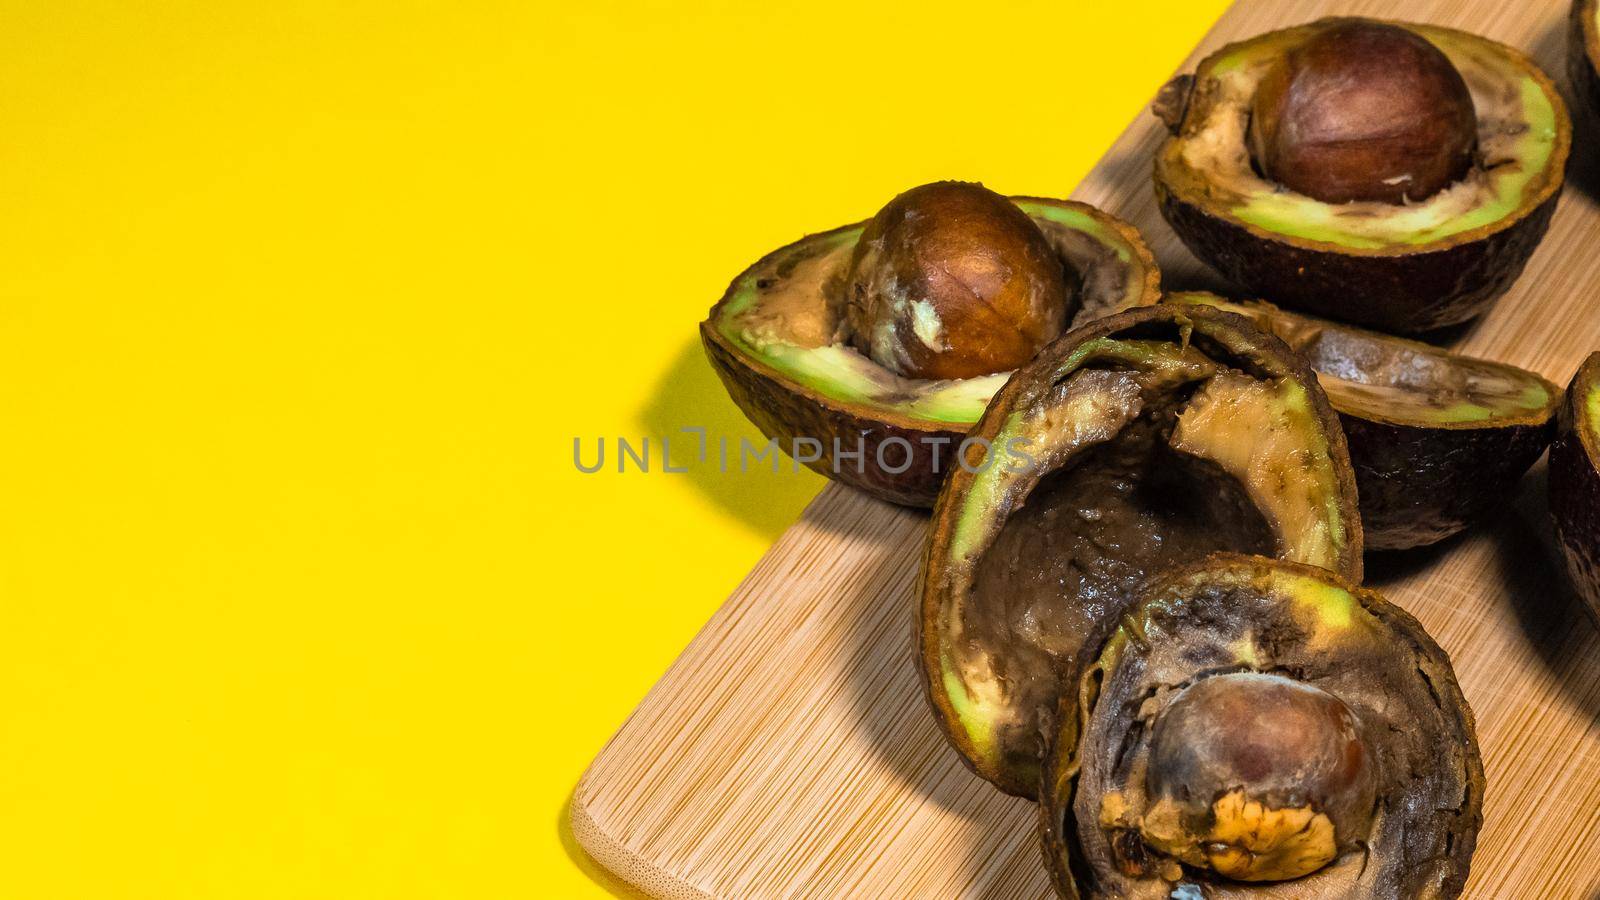 Rotten Avocado on Yellow background. Close up details Rotten tropical Fruits on bambus Chipper. Copy space. Yellow background contains Unhealthy Food.